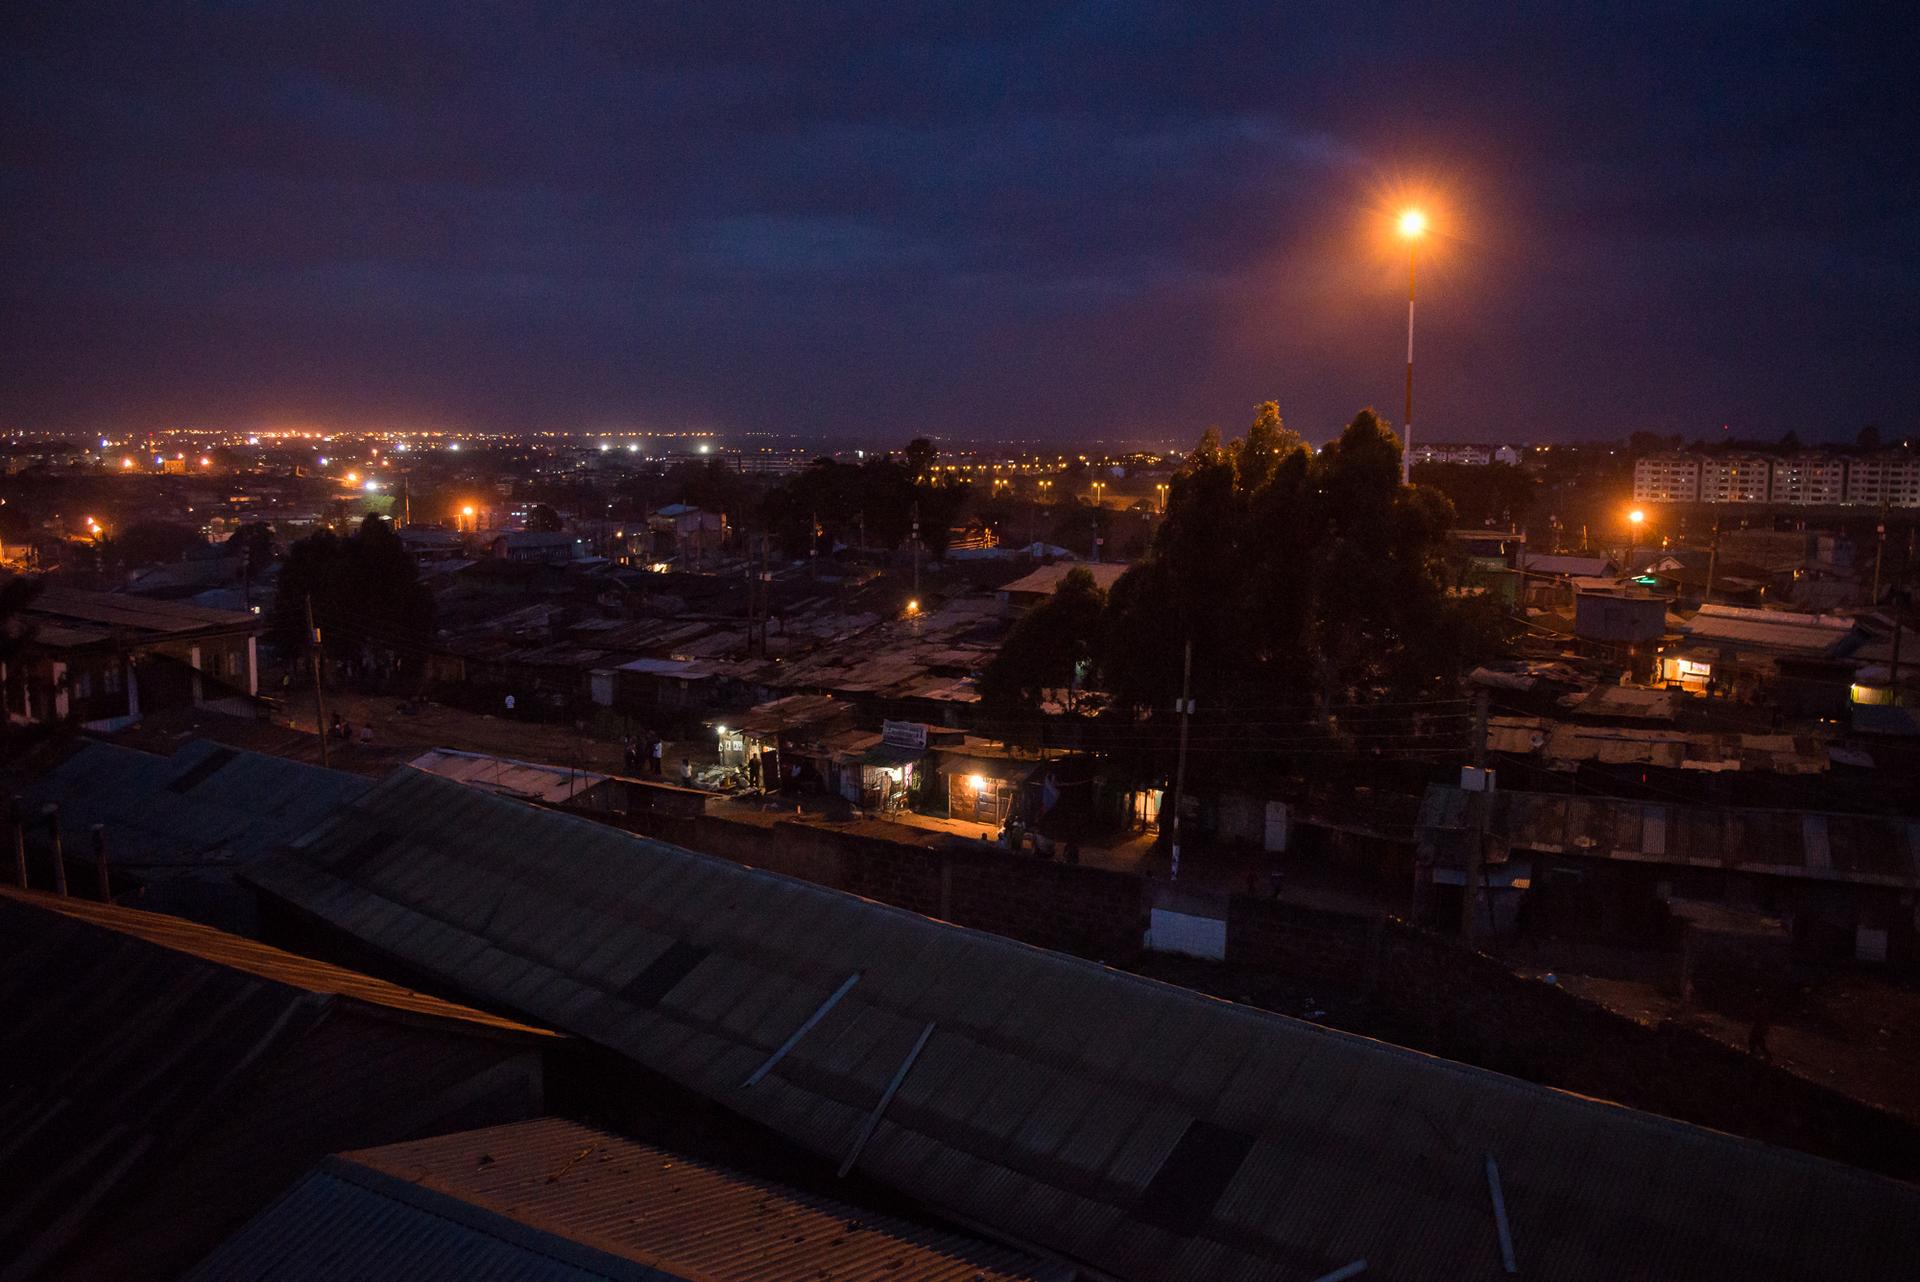 Night falls on Kibera, an informal settlement in Nairobi, Kenya. Much of the 2007/2008 post-election violence occurred in and around Kibera. Tonight, it is quiet.